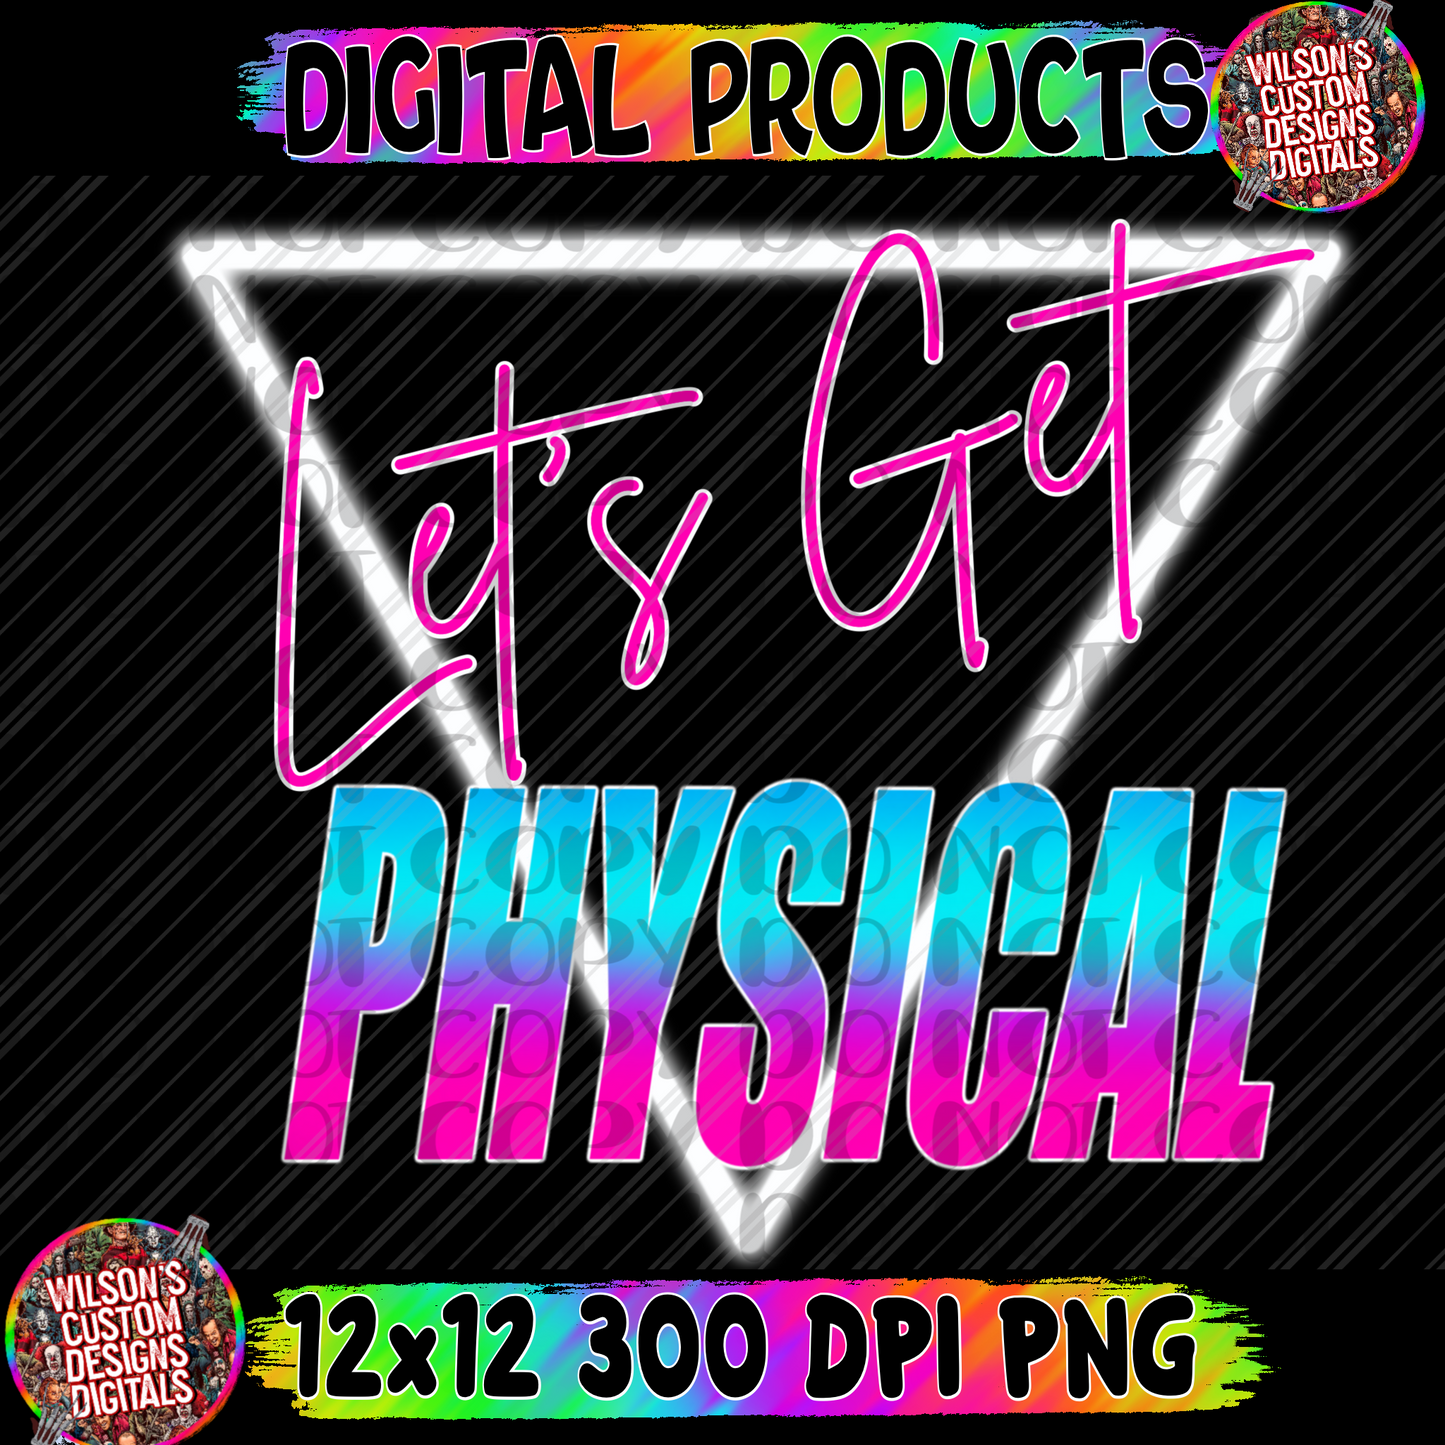 Let’s get physical